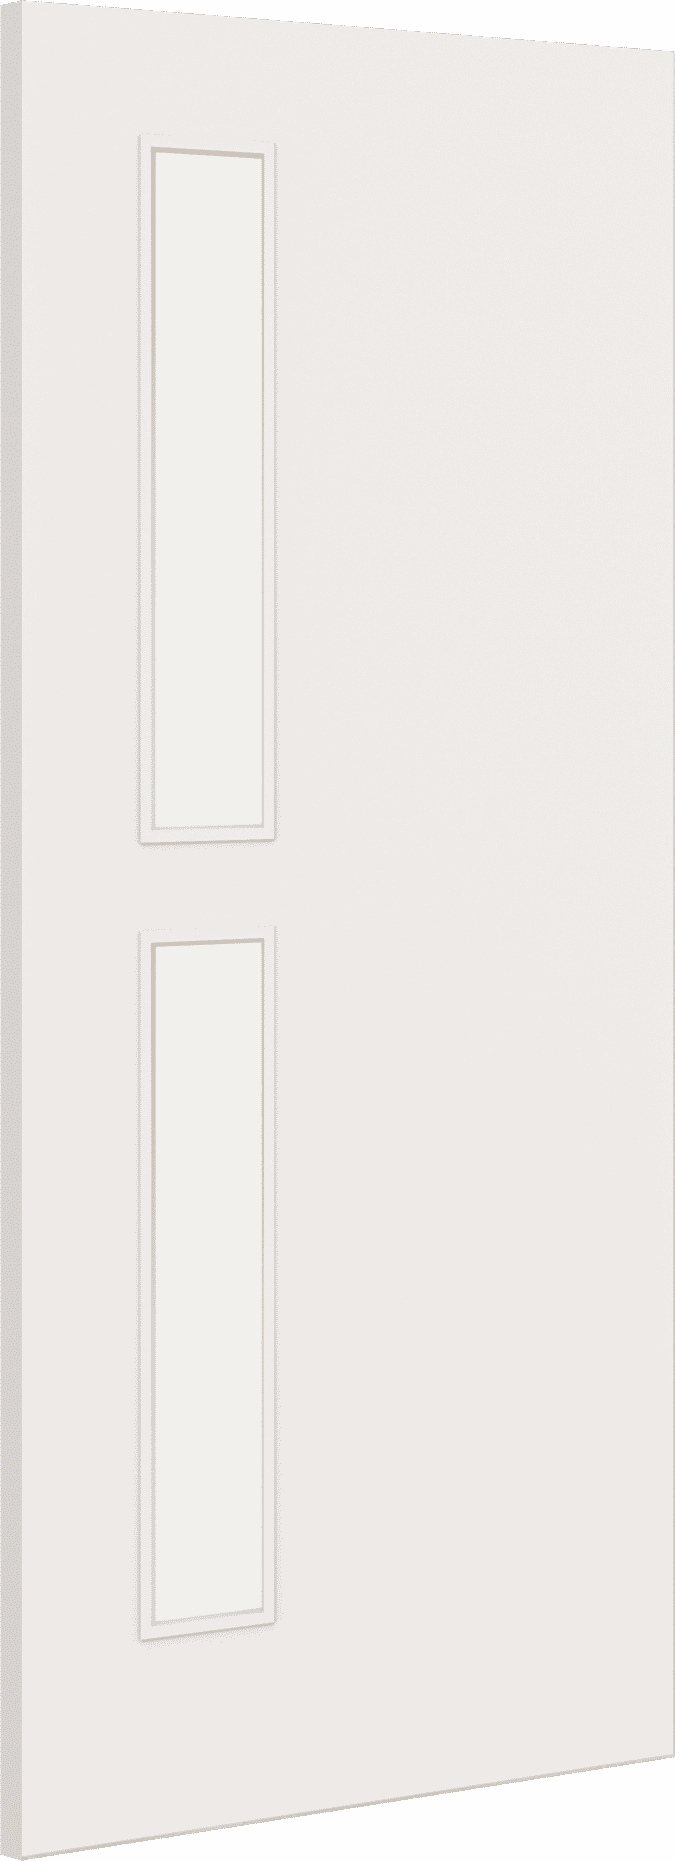 1981mm x 914mm x 44mm (36") Architectural Paint Grade White 07 Frosted Glazed Fire Door Blank